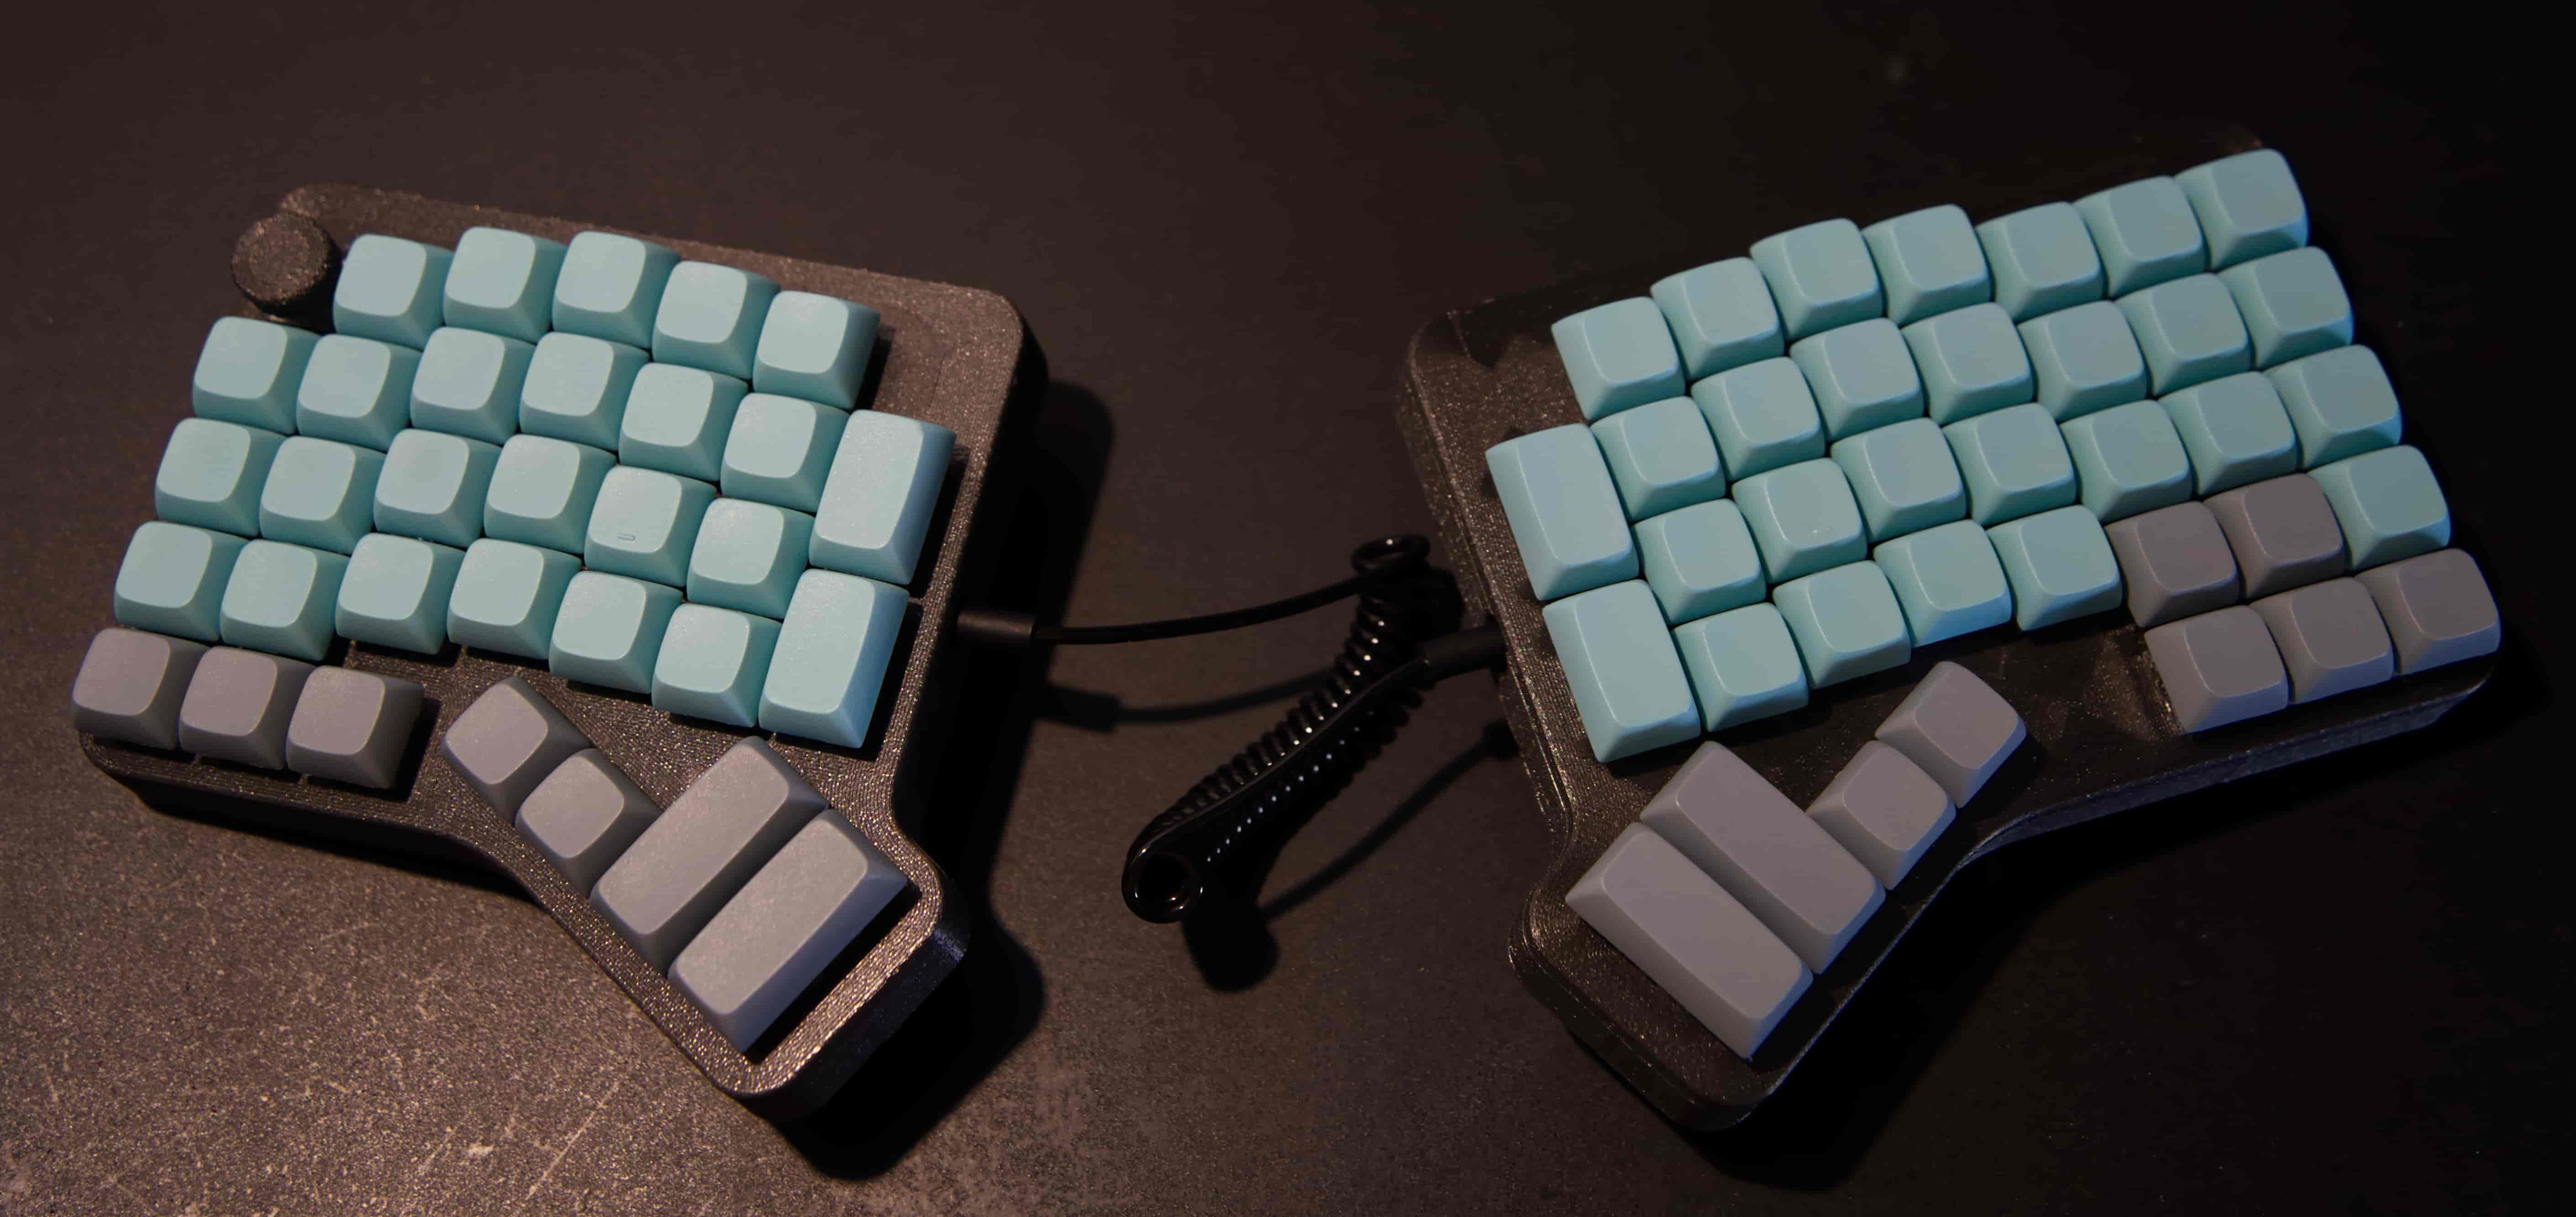 Picture of the final assembled keyboard